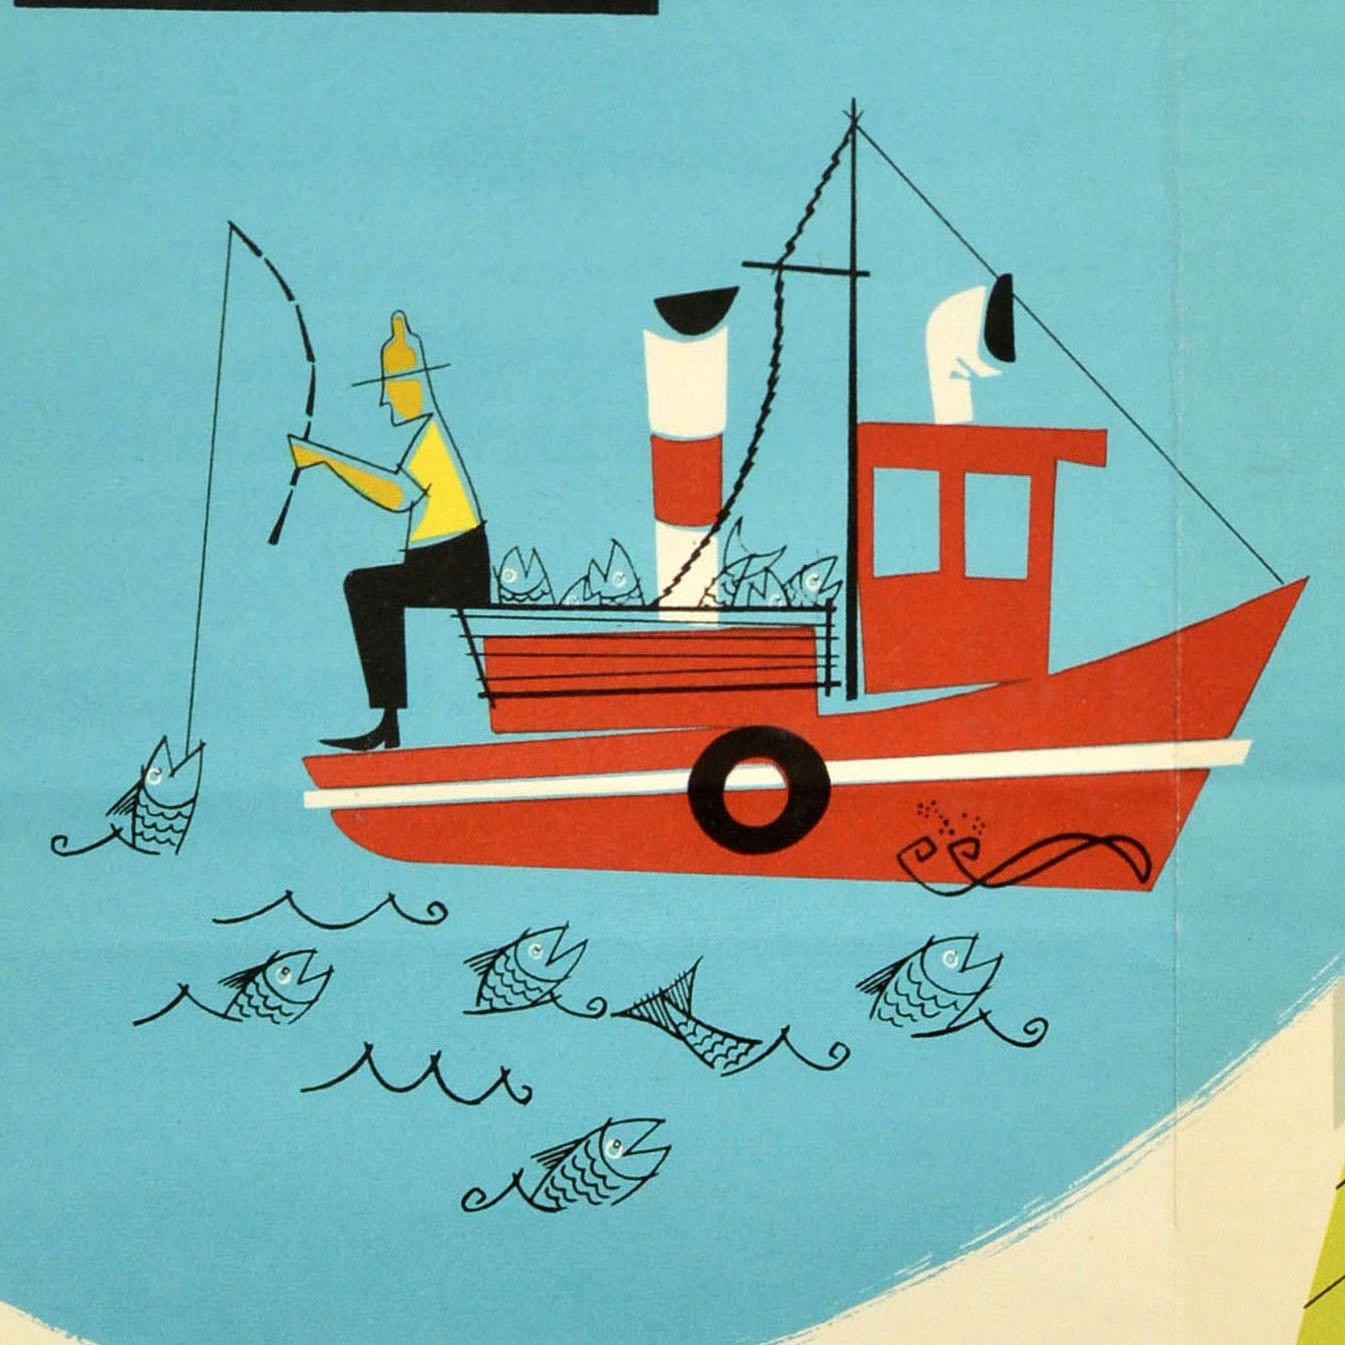 Original vintage travel poster for Canada servizi plurissetimanali / multiple weekly services with KLM Royal Dutch Airlines featuring a colourful design depicting a fisherman fishing from the edge of a red and white boat below a bridge with a city